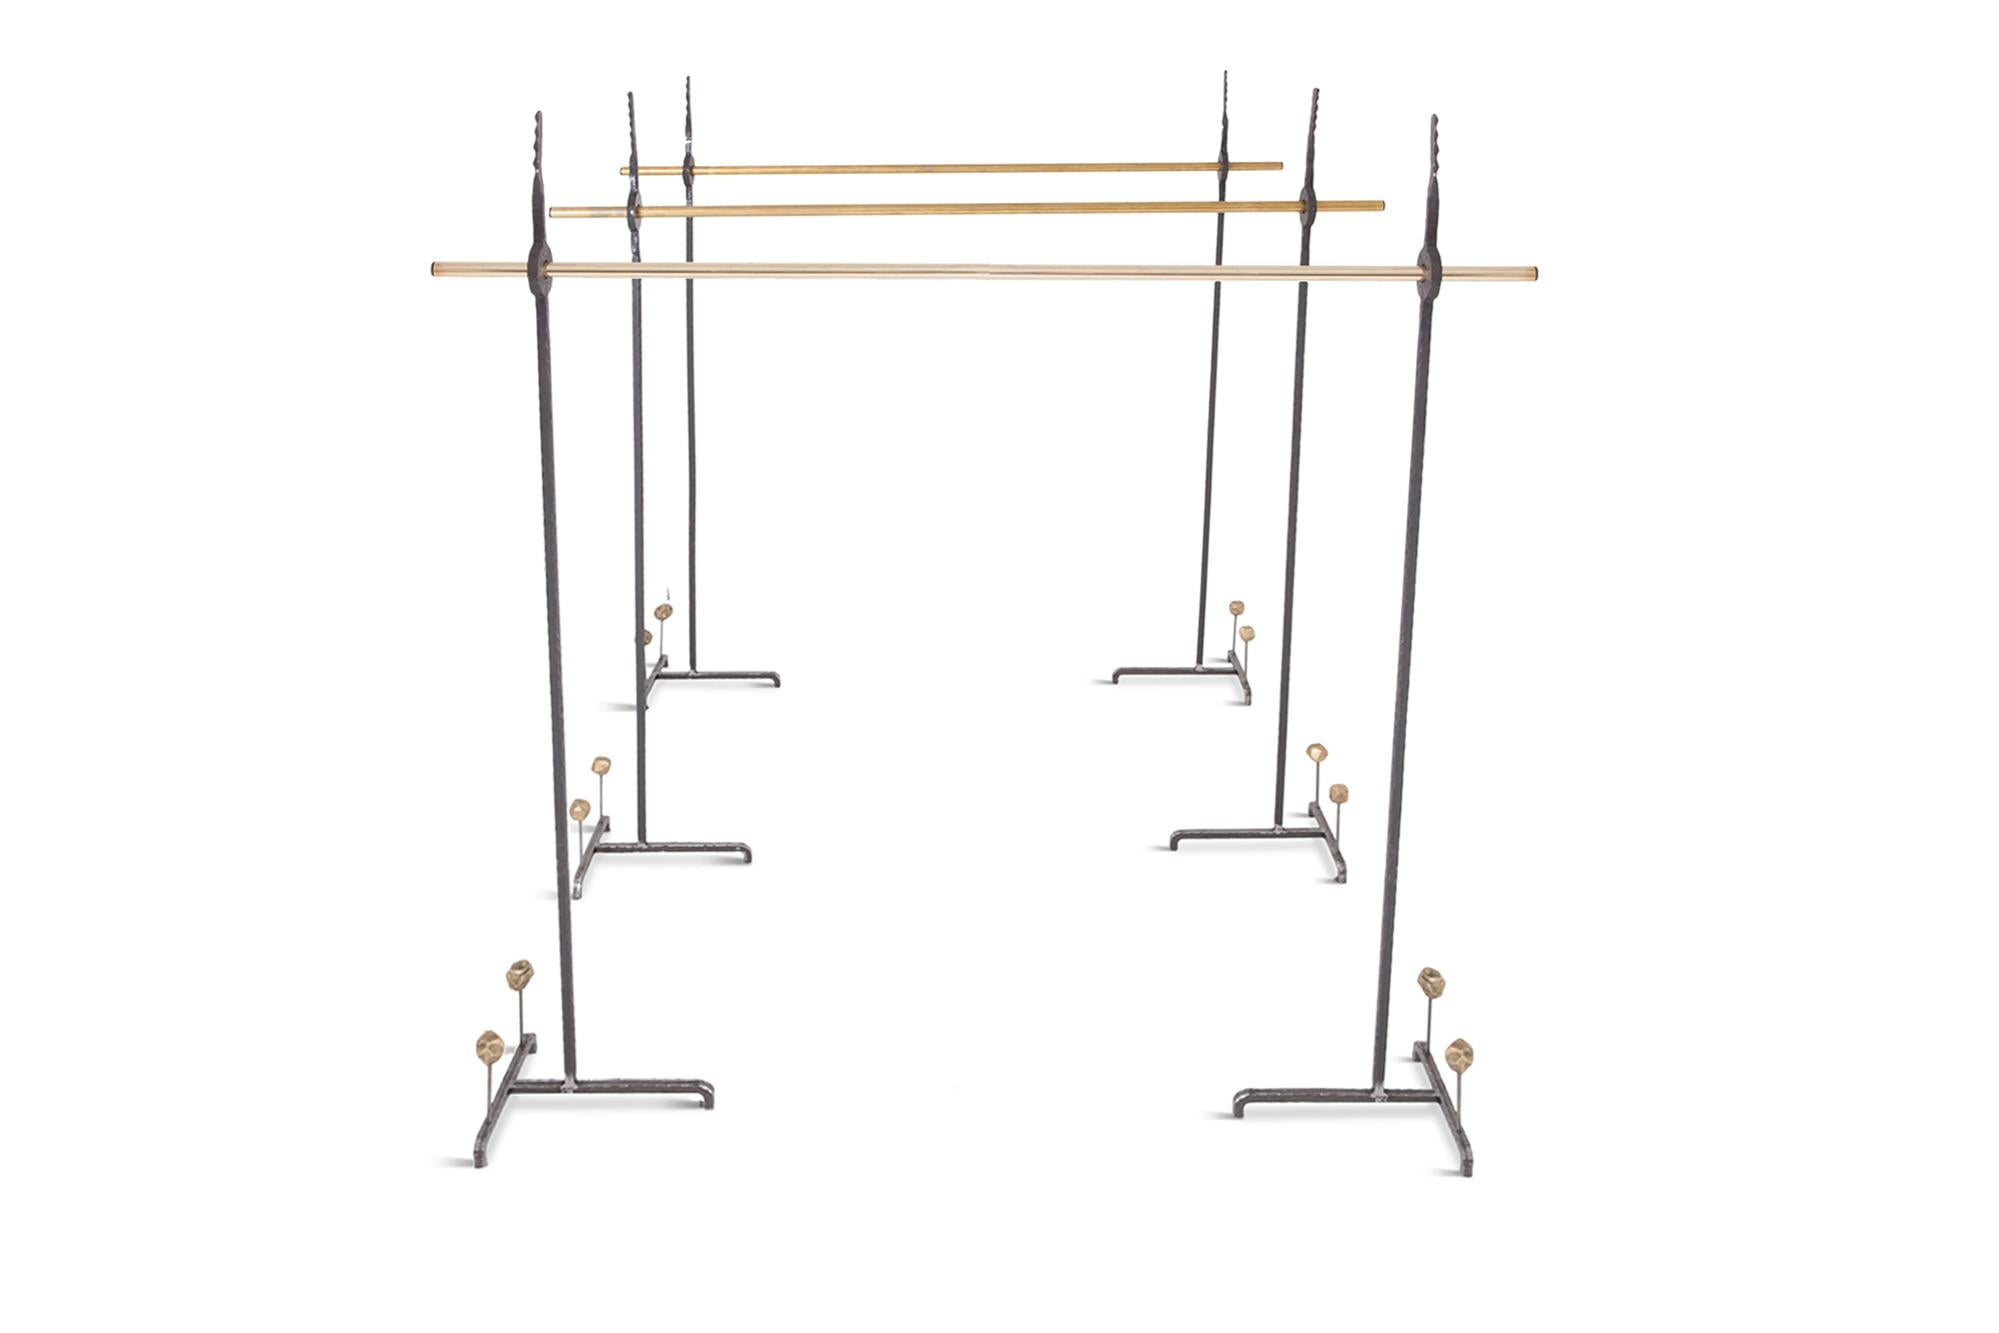 Contemporary clothing racks by Thomas Serruys for Studio Goldwood.
Custom designed for the Poiret showroom.

Brutalist Wrought and forged iron elements combined with chic brass details make this a very a la mode design.

Suits well in a